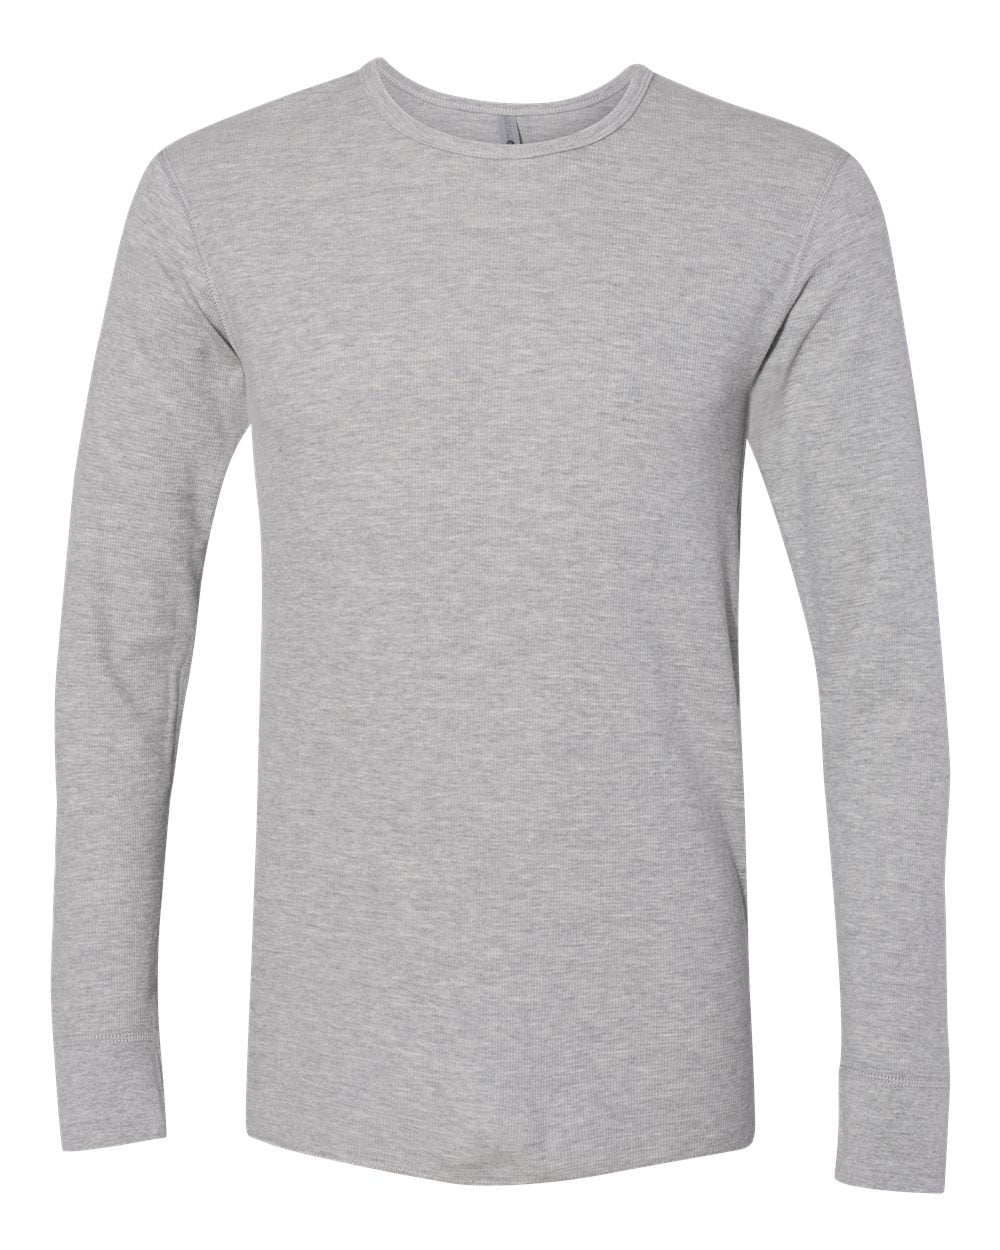 Next Level Apparel - Next Level Unisex Long Sleeve Thermal 8201, S ...